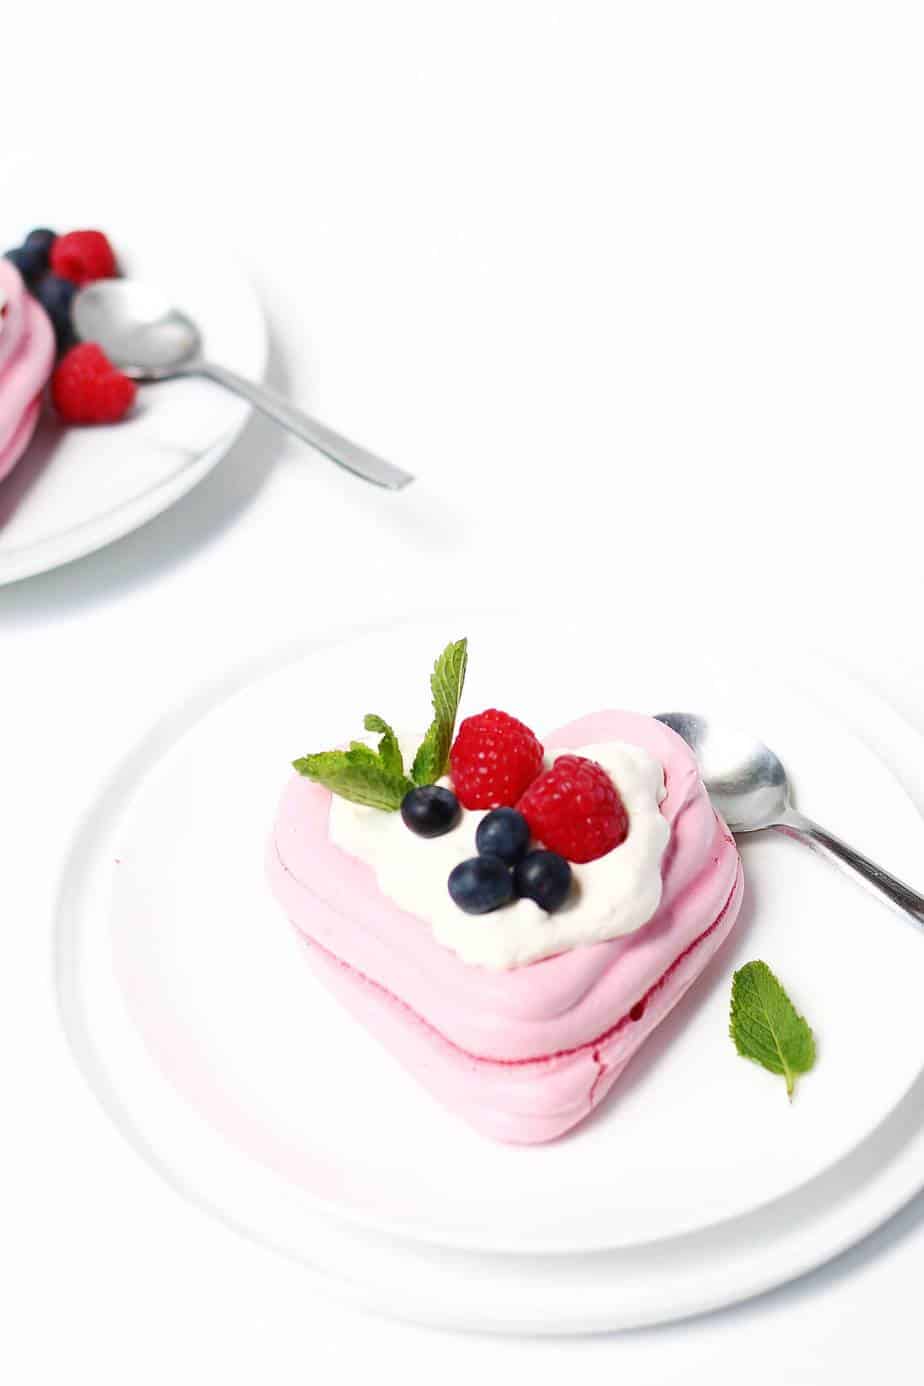 Mini Heart Pavlovas - only three ingredients and are the perfect beautiful quick and easy dessert for Valentine's Day